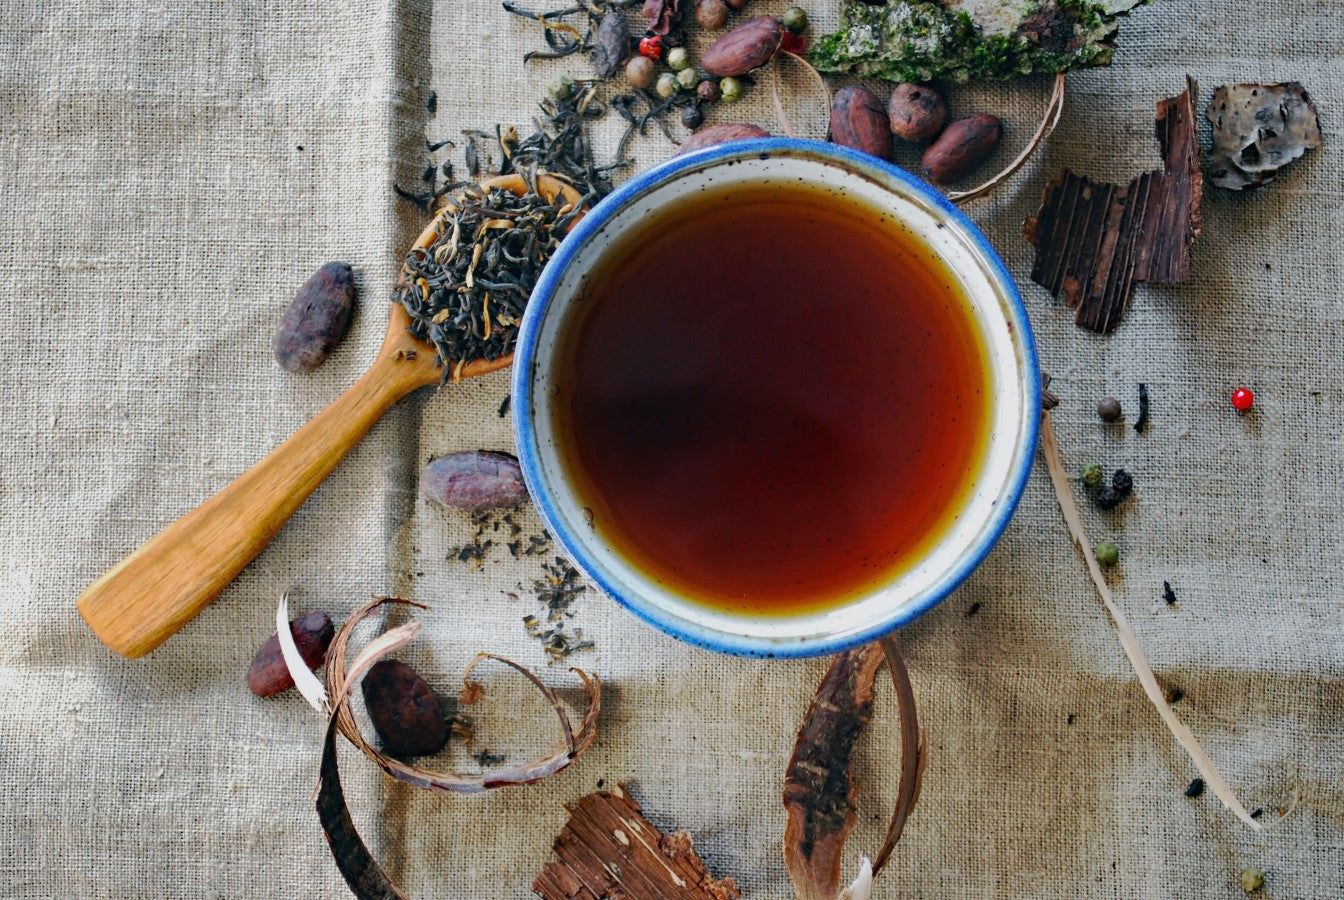 Blue Rimmed Cup Of Herbal Tea With Various Loose Tea Leaves And Nuts On Linen Cloth